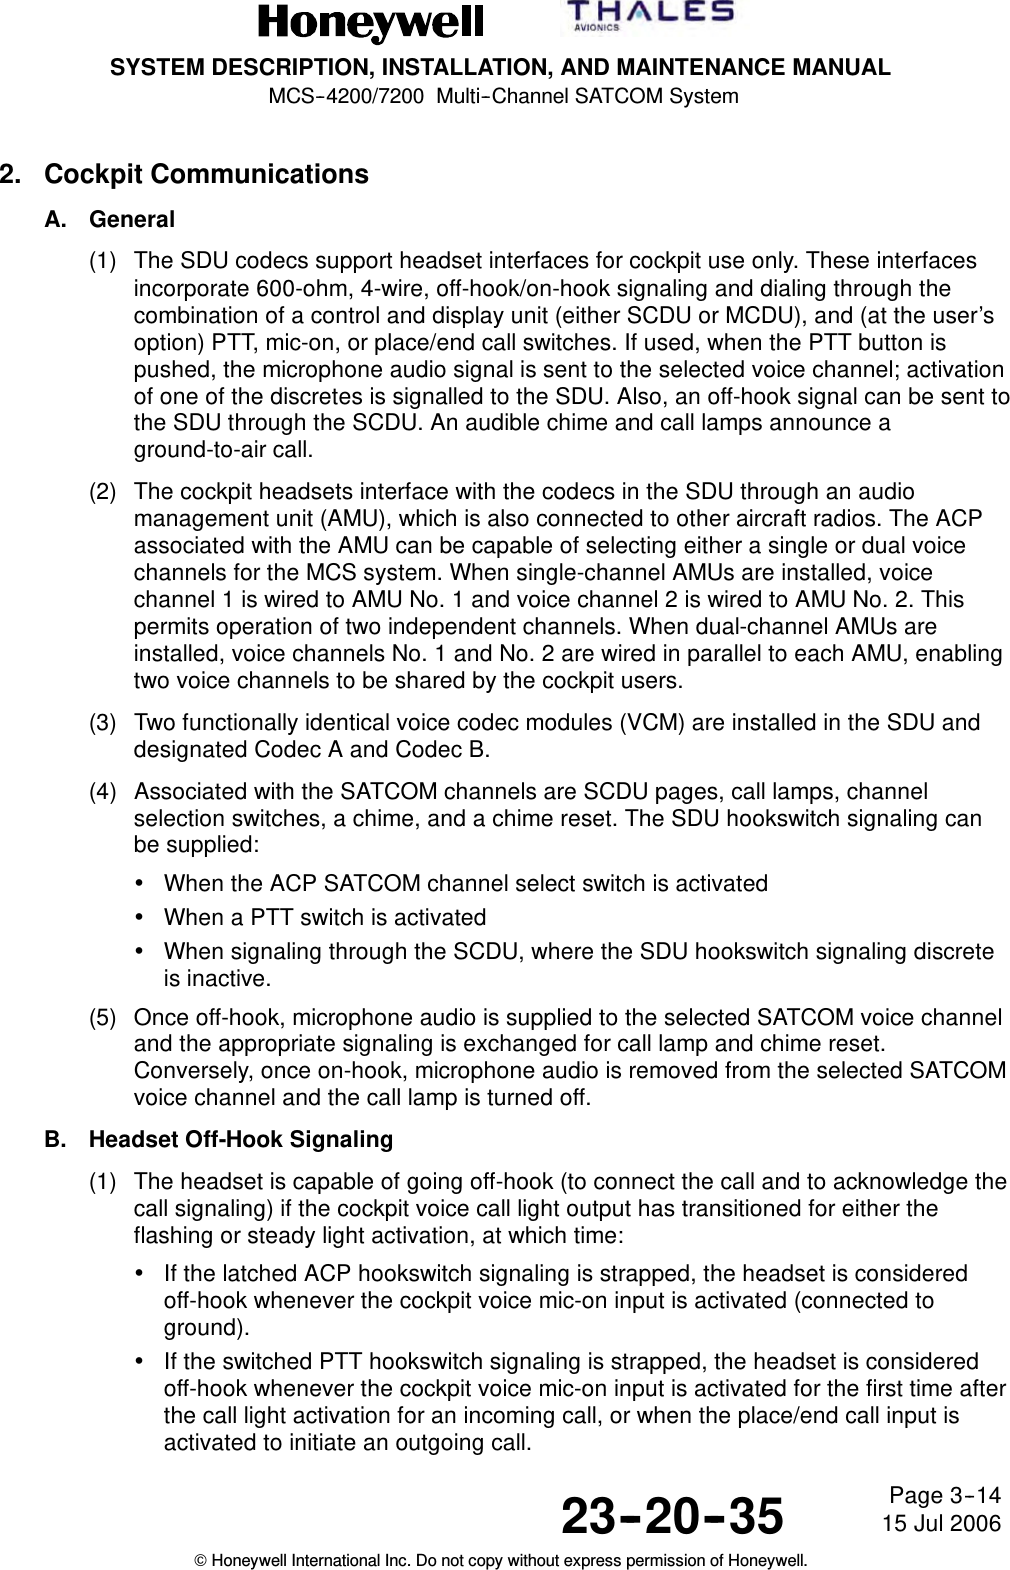 SYSTEM DESCRIPTION, INSTALLATION, AND MAINTENANCE MANUALMCS--4200/7200 Multi--Channel SATCOM System23--20--35 15 Jul 2006Honeywell International Inc. Do not copy without express permission of Honeywell.Page 3--142. Cockpit CommunicationsA. General(1) The SDU codecs support headset interfaces for cockpit use only. These interfacesincorporate 600-ohm, 4-wire, off-hook/on-hook signaling and dialing through thecombination of a control and display unit (either SCDU or MCDU), and (at the user’soption) PTT, mic-on, or place/end call switches. If used, when the PTT button ispushed, the microphone audio signal is sent to the selected voice channel; activationof one of the discretes is signalled to the SDU. Also, an off-hook signal can be sent tothe SDU through the SCDU. An audible chime and call lamps announce aground-to-air call.(2) The cockpit headsets interface with the codecs in the SDU through an audiomanagement unit (AMU), which is also connected to other aircraft radios. The ACPassociated with the AMU can be capable of selecting either a single or dual voicechannels for the MCS system. When single-channel AMUs are installed, voicechannel 1 is wired to AMU No. 1 and voice channel 2 is wired to AMU No. 2. Thispermits operation of two independent channels. When dual-channel AMUs areinstalled, voice channels No. 1 and No. 2 are wired in parallel to each AMU, enablingtwo voice channels to be shared by the cockpit users.(3) Two functionally identical voice codec modules (VCM) are installed in the SDU anddesignated Codec A and Codec B.(4) Associated with the SATCOM channels are SCDU pages, call lamps, channelselection switches, a chime, and a chime reset. The SDU hookswitch signaling canbe supplied:•When the ACP SATCOM channel select switch is activated•When a PTT switch is activated•When signaling through the SCDU, where the SDU hookswitch signaling discreteis inactive.(5) Once off-hook, microphone audio is supplied to the selected SATCOM voice channeland the appropriate signaling is exchanged for call lamp and chime reset.Conversely, once on-hook, microphone audio is removed from the selected SATCOMvoice channel and the call lamp is turned off.B. Headset Off-Hook Signaling(1) The headset is capable of going off-hook (to connect the call and to acknowledge thecall signaling) if the cockpit voice call light output has transitioned for either theflashing or steady light activation, at which time:•If the latched ACP hookswitch signaling is strapped, the headset is consideredoff-hook whenever the cockpit voice mic-on input is activated (connected toground).•If the switched PTT hookswitch signaling is strapped, the headset is consideredoff-hook whenever the cockpit voice mic-on input is activated for the first time afterthe call light activation for an incoming call, or when the place/end call input isactivated to initiate an outgoing call.